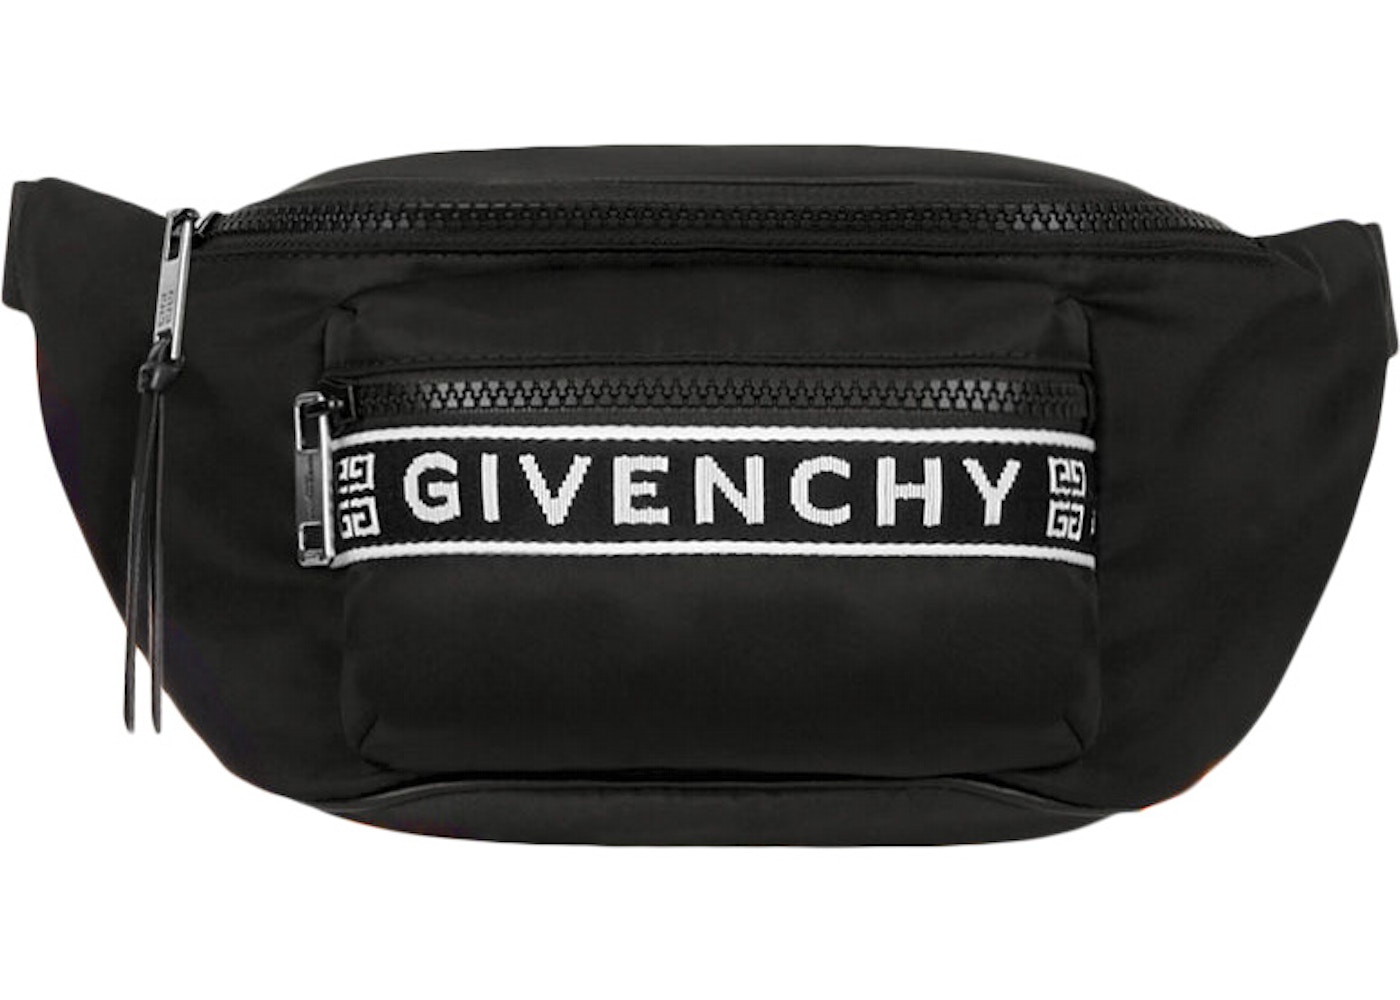 Givenchy 4G Bum Bag Black in Nylon with Silver-tone